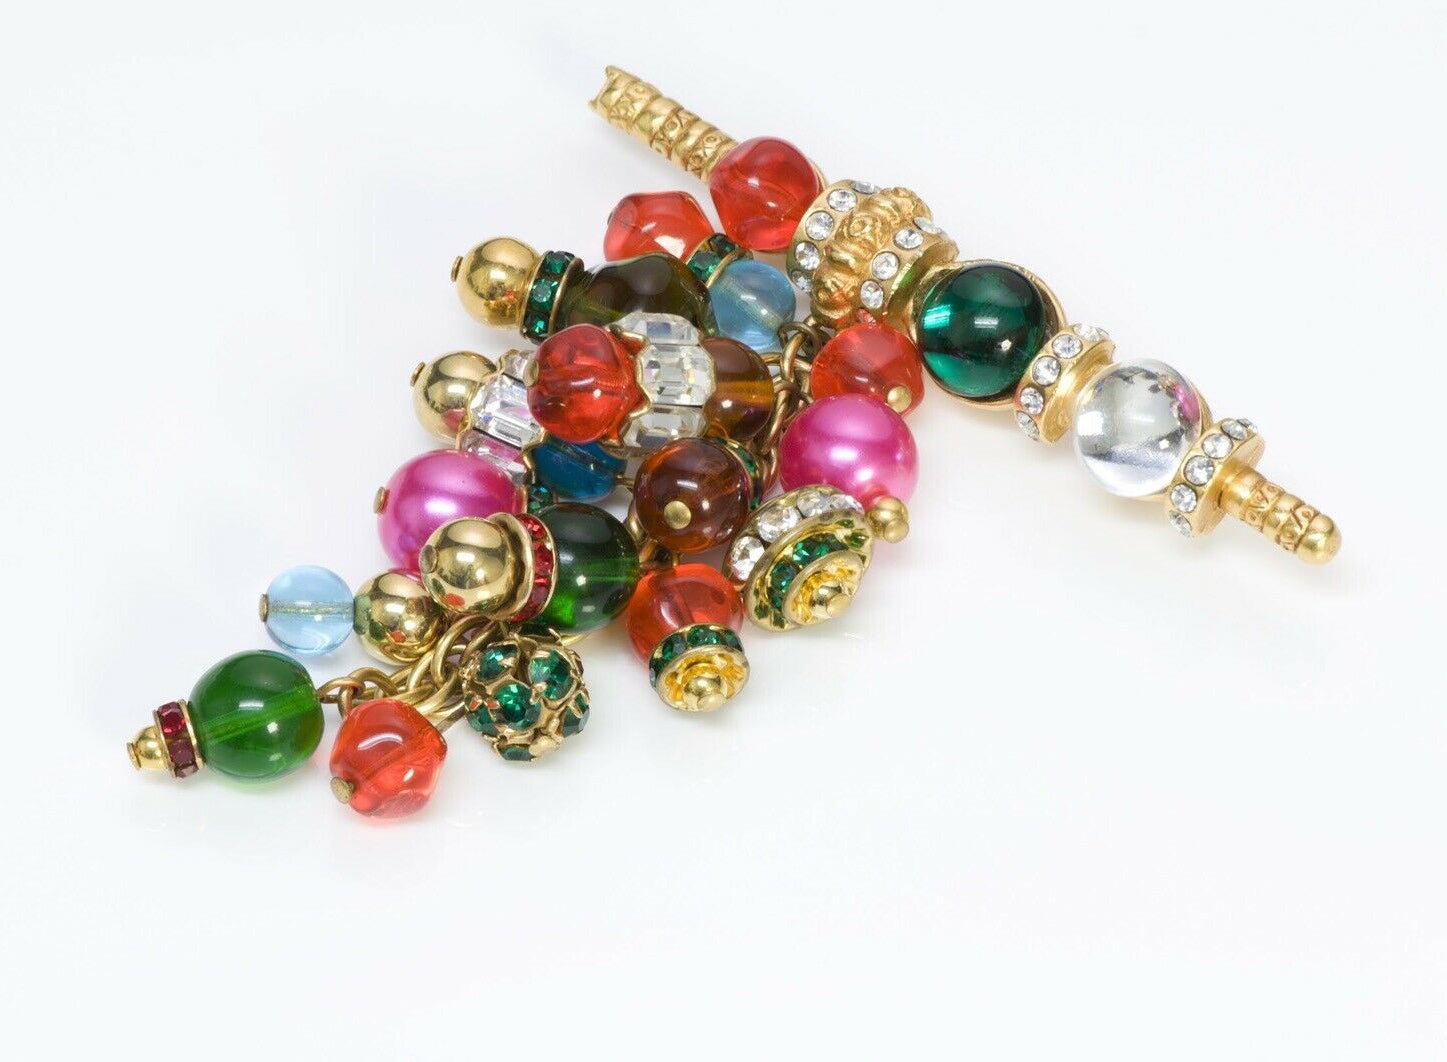 Vintage Christian Dior Boutique Glass Beads Brooch